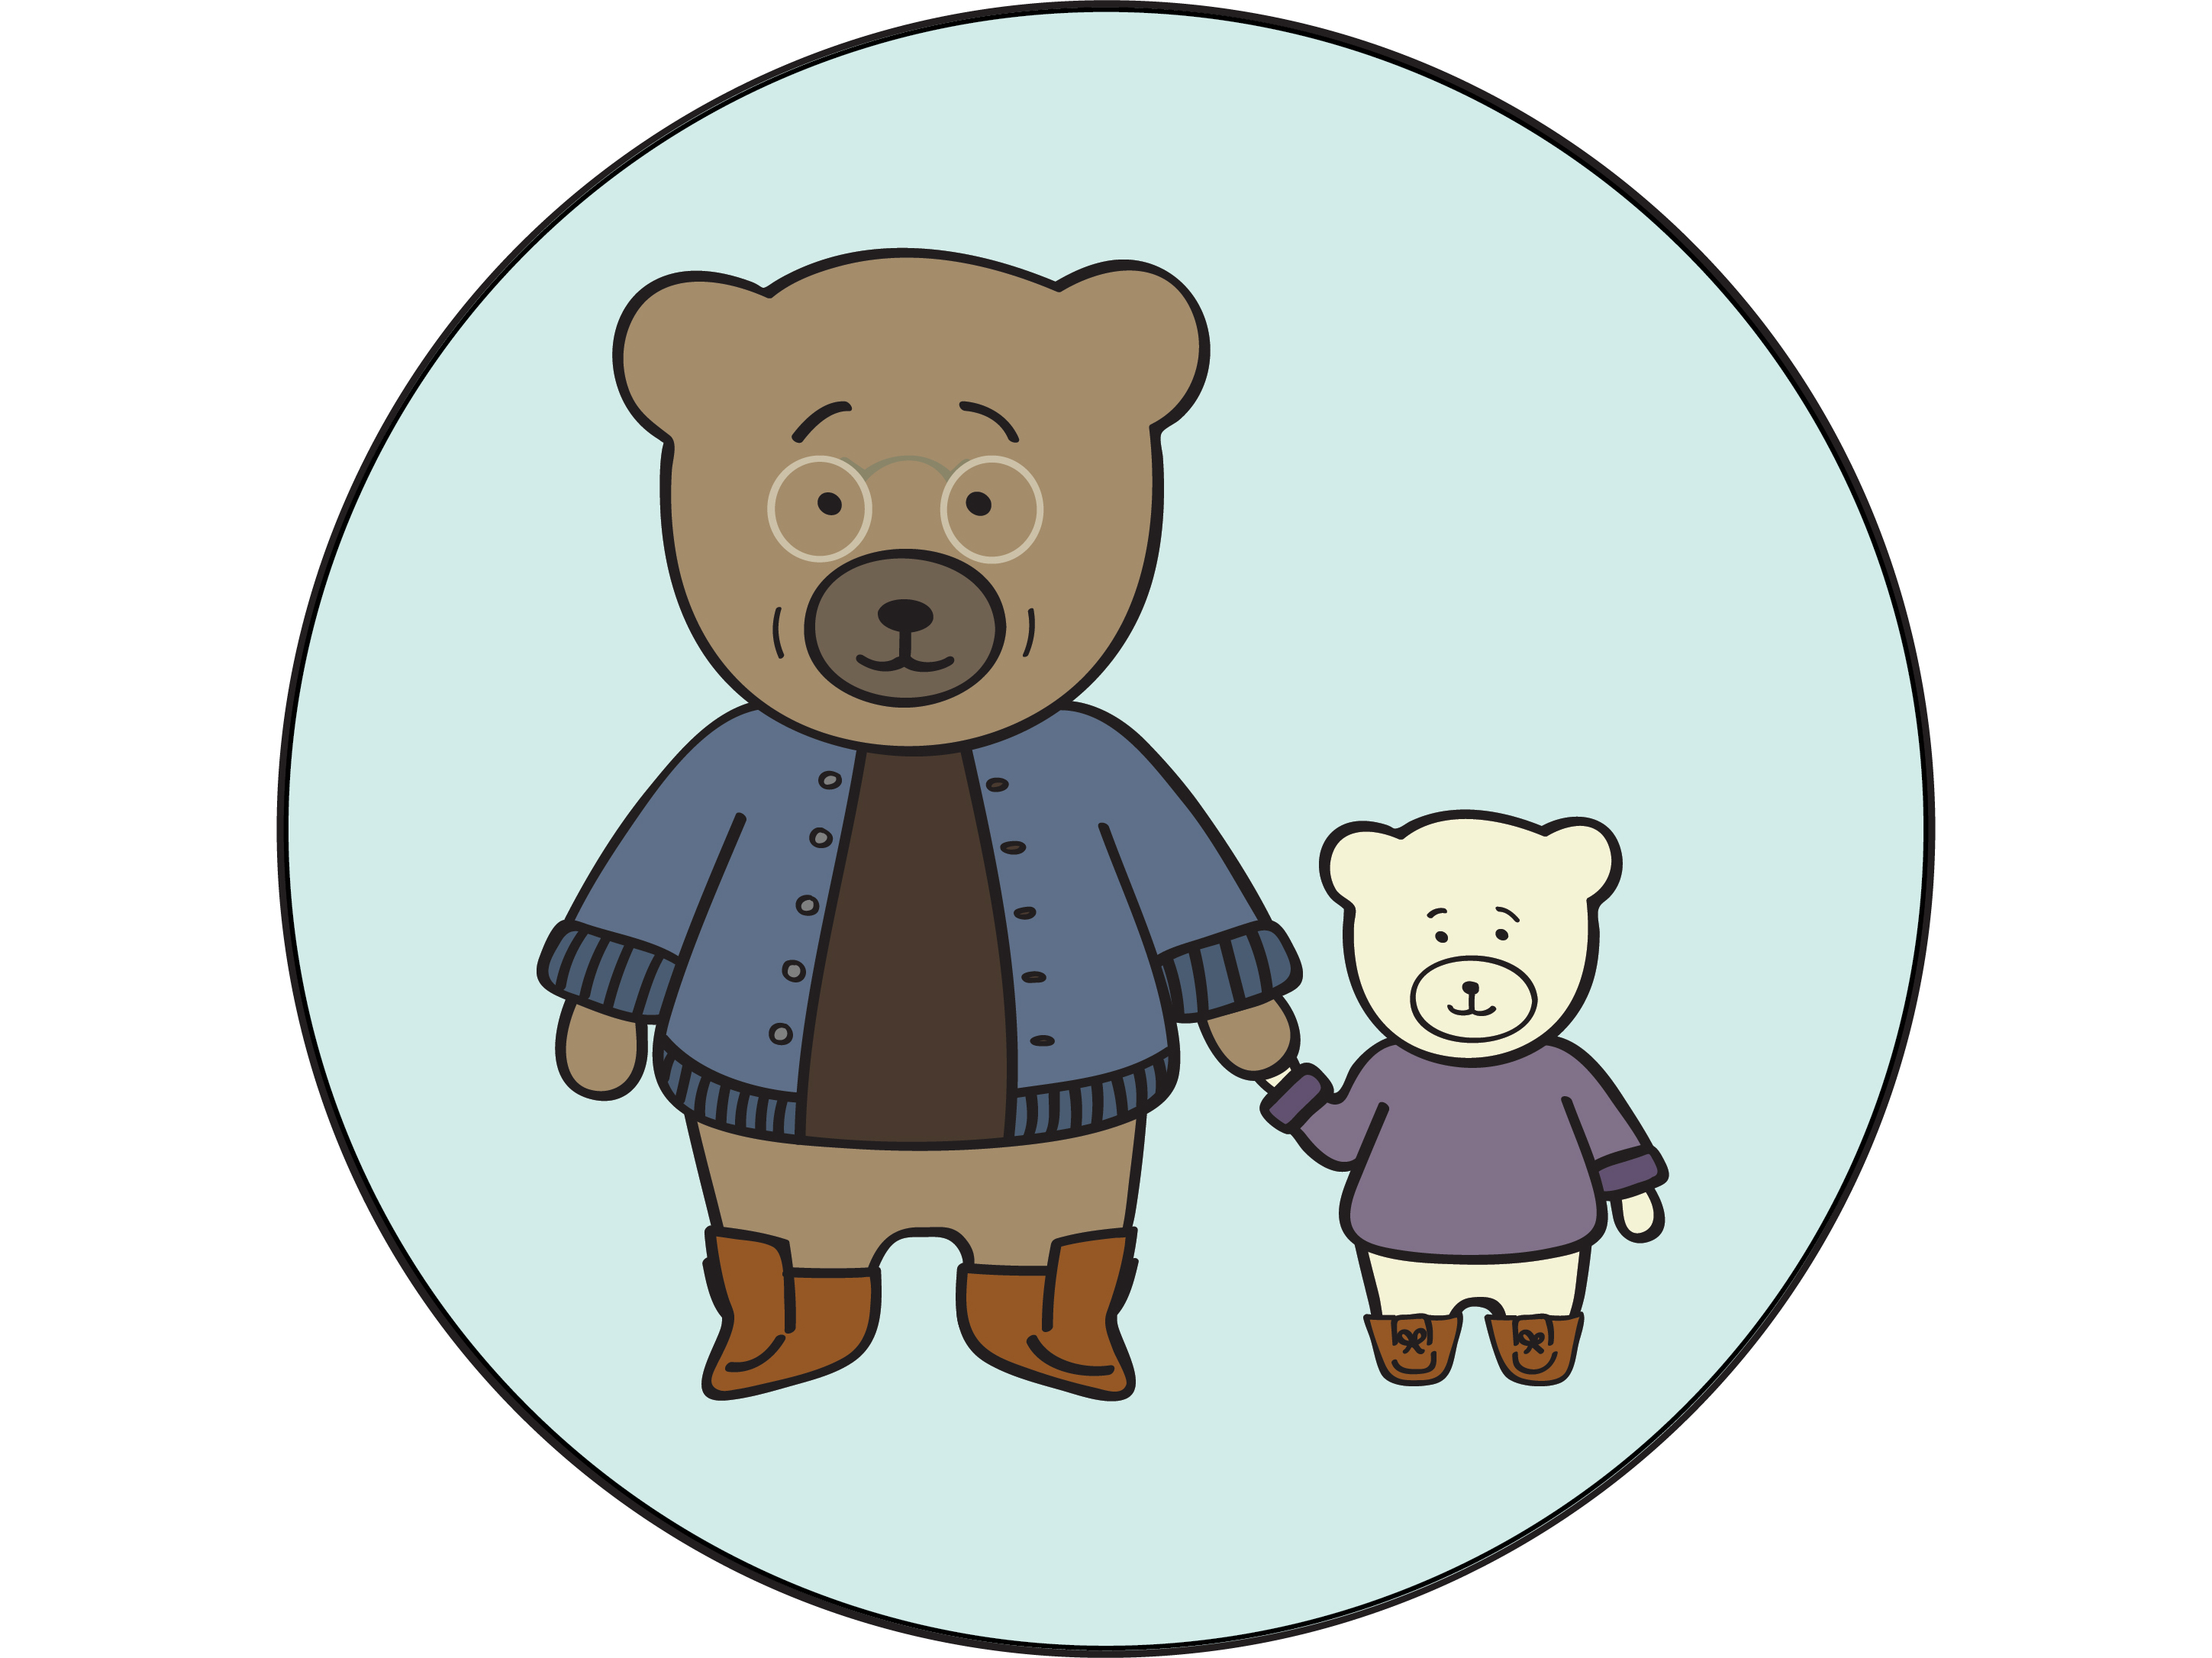 Illustration of an elder brown bear wearing glasses and a blue cardigan holding the hand of a younger white bear who is wearing a purple sweatshirt